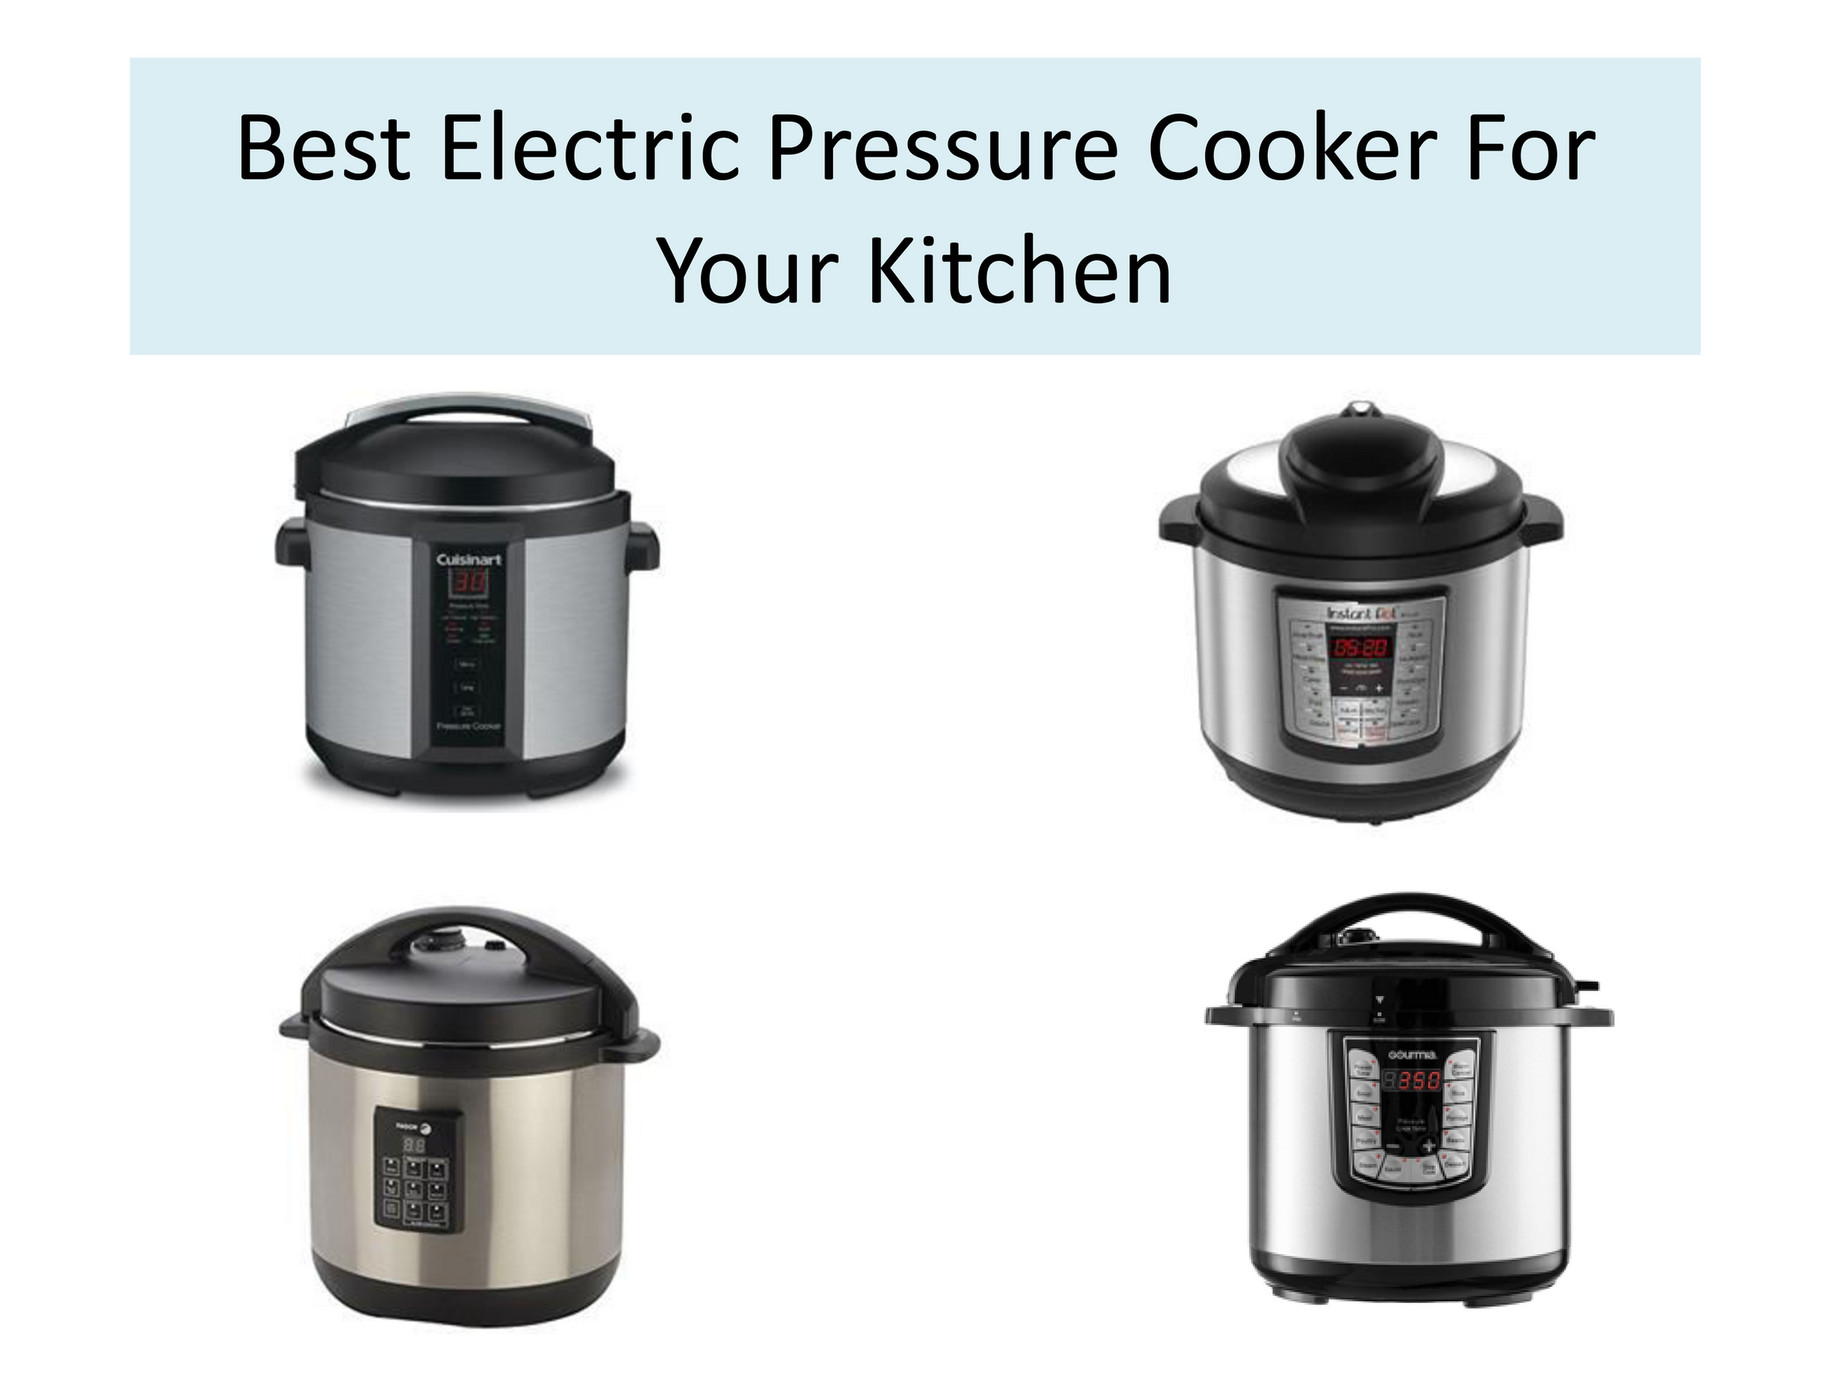 williamflender - Best Electric Pressure Cooker For Your Kitchen 2018 ...